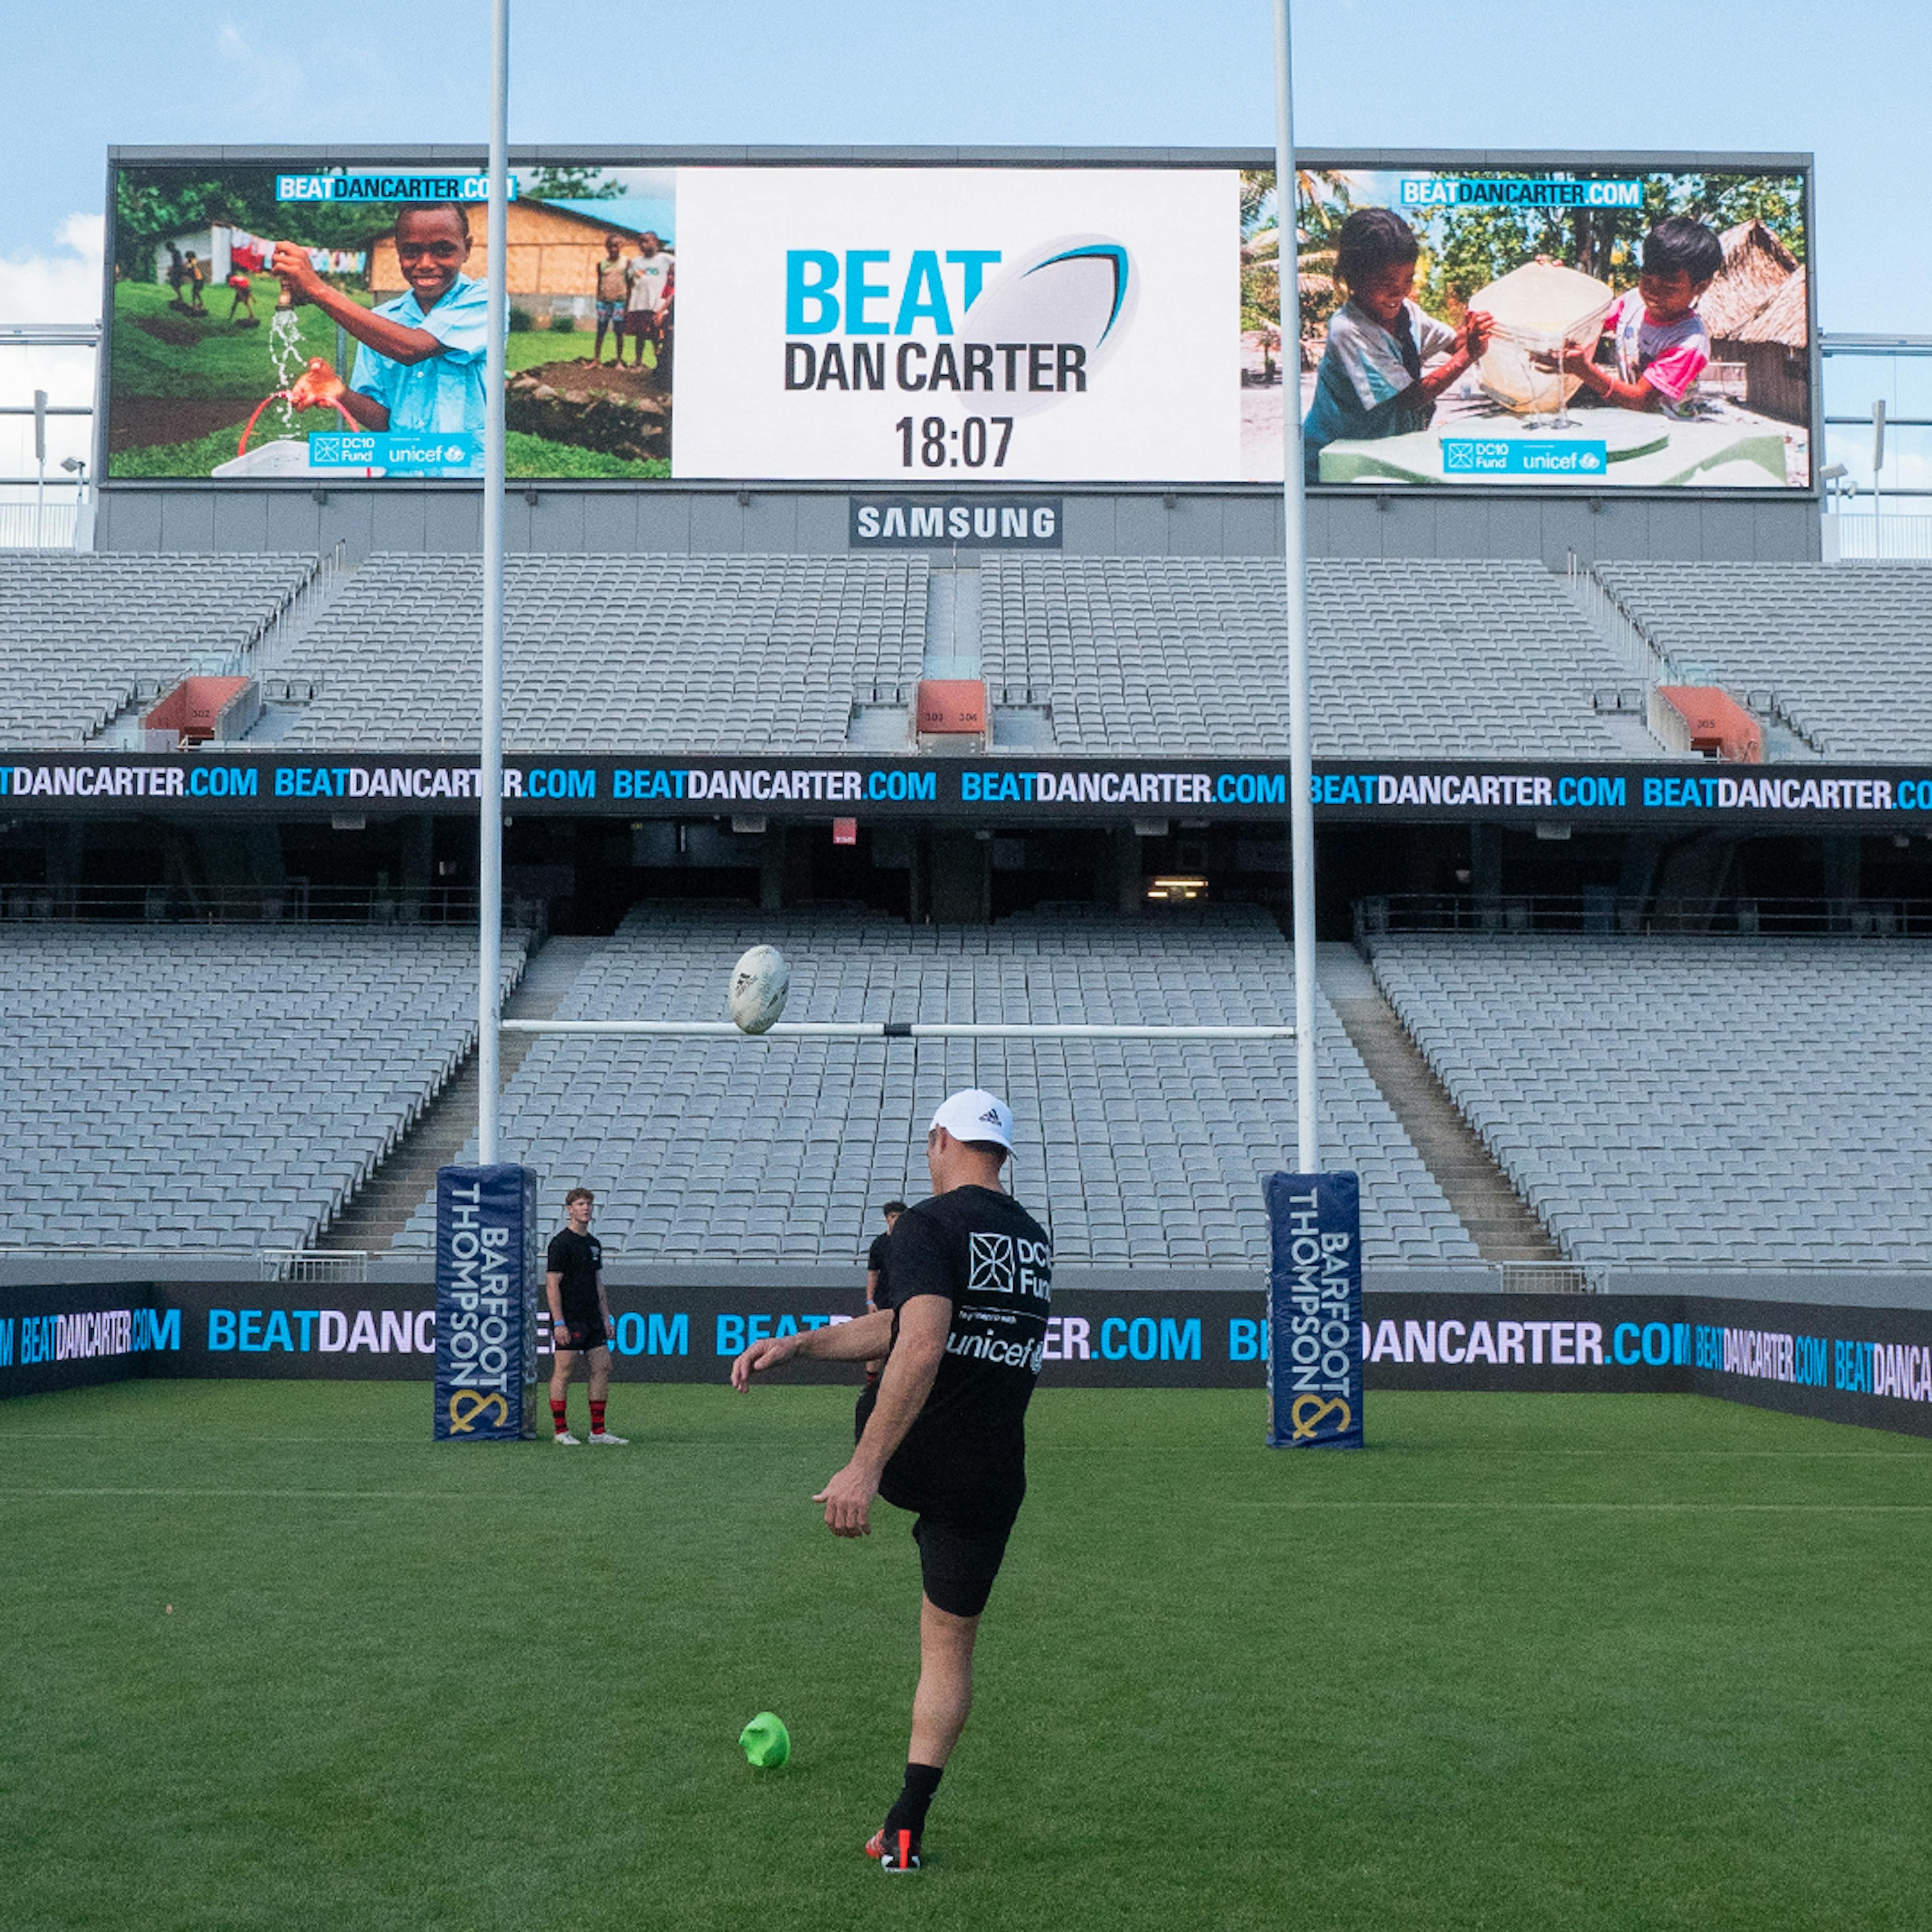 A girl throwing the ball at Eden Park for the Beat Dan Carter challenge